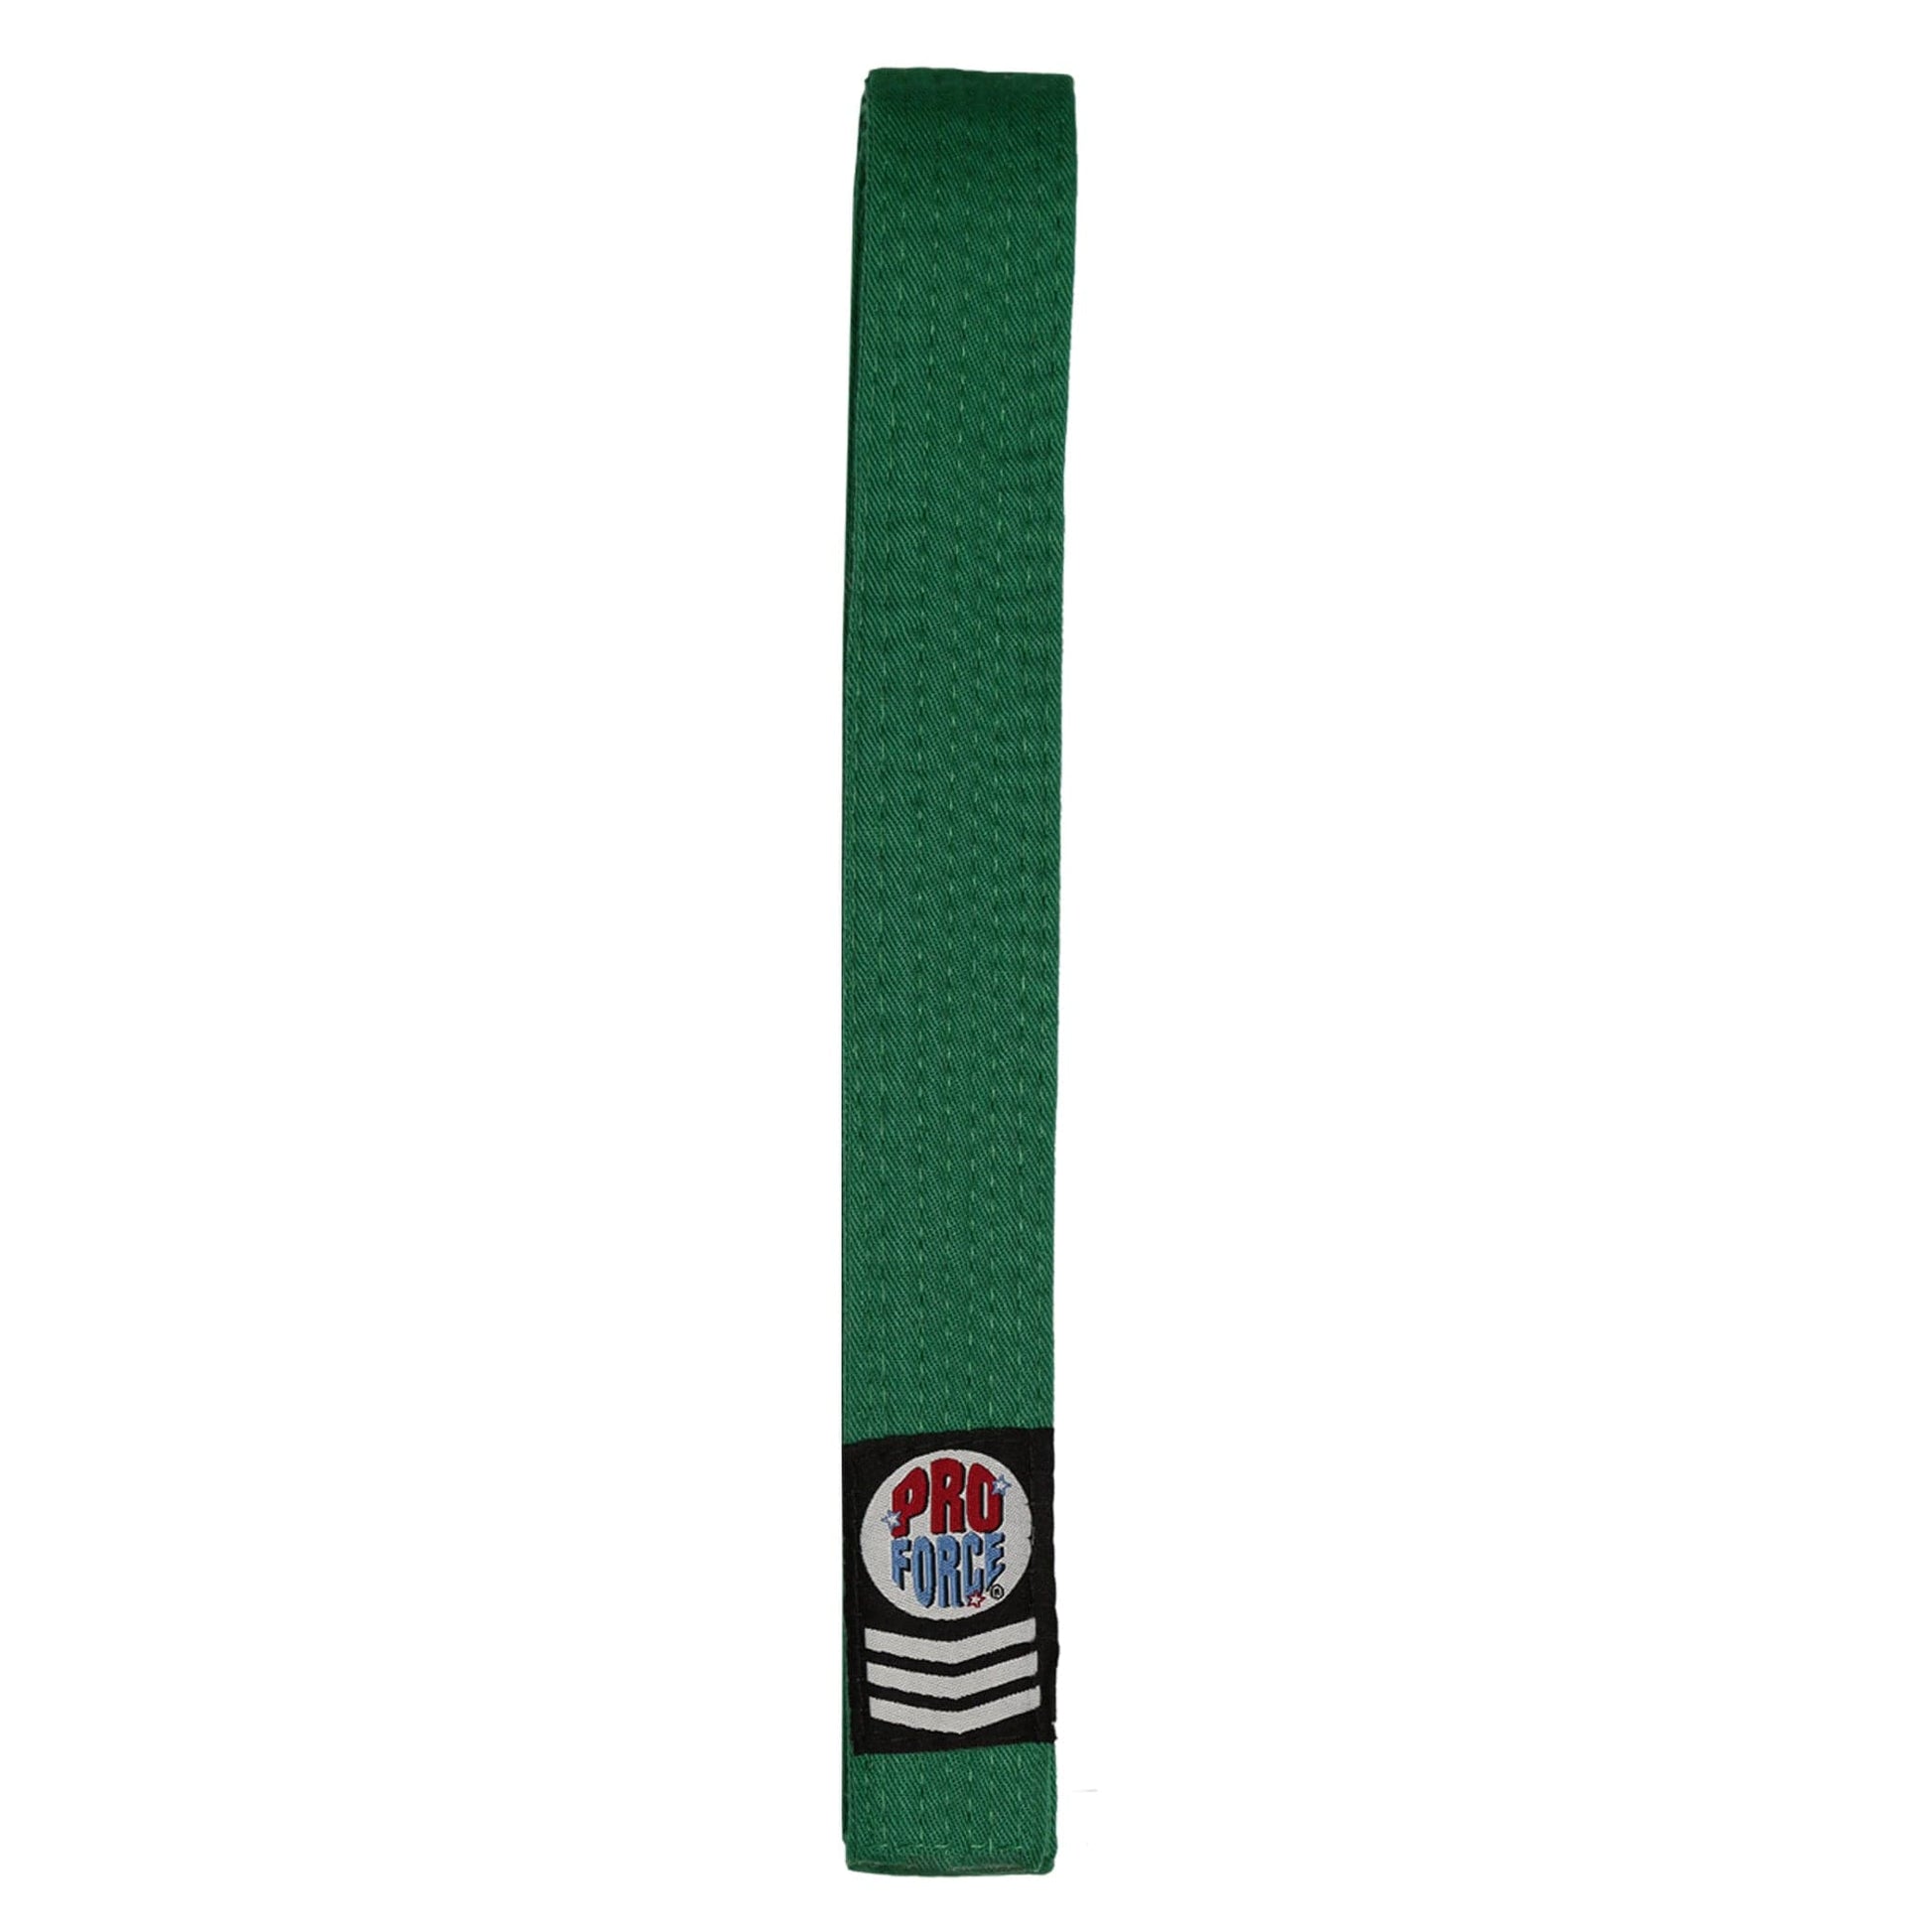 EclipseMartialArtsSupplies sporting goods Green / 0 child small ProForce Gladiator 1.75 inch wide Double Wrap Karate Belts